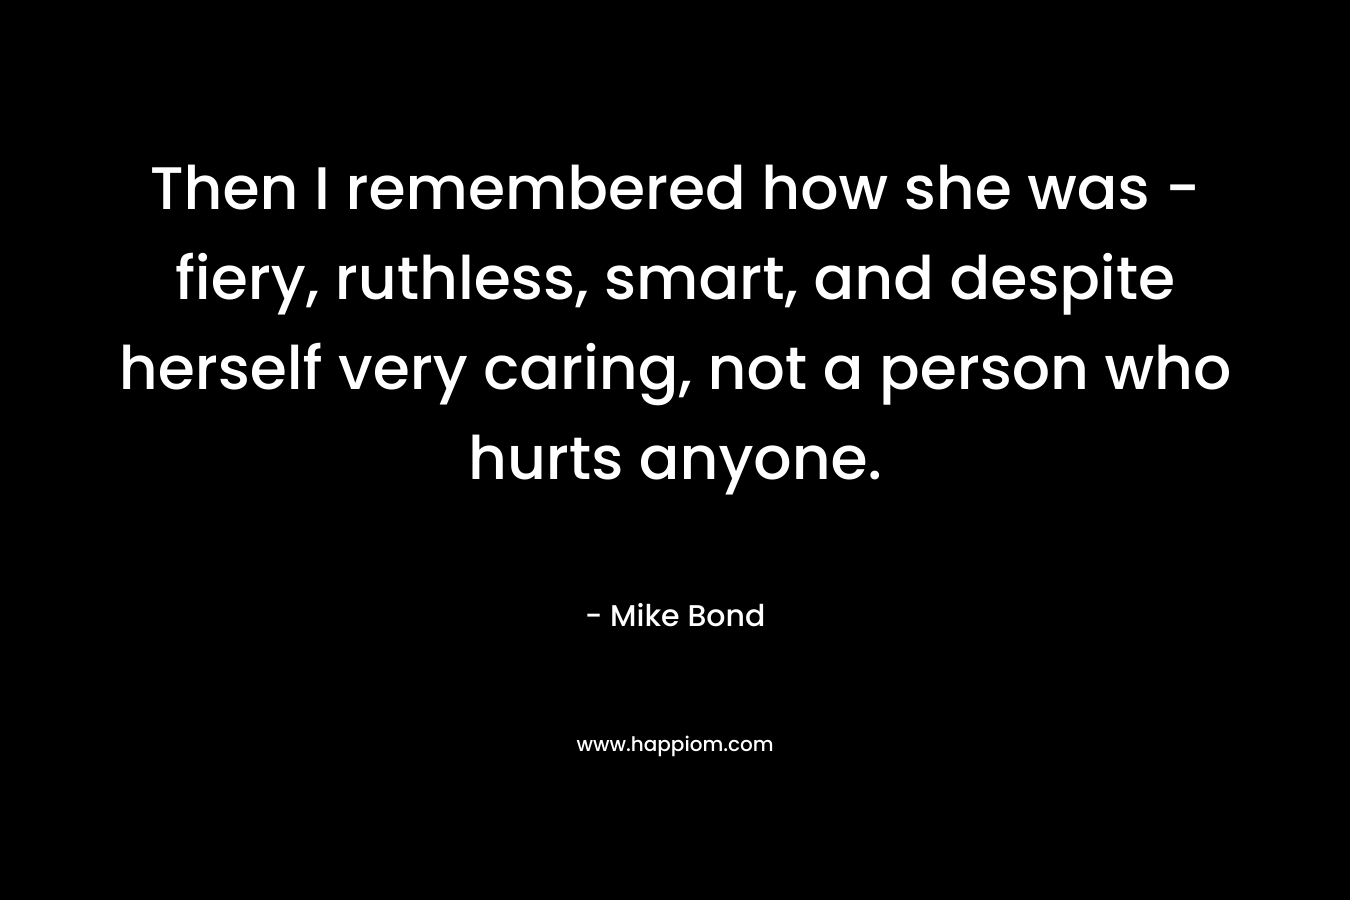 Then I remembered how she was - fiery, ruthless, smart, and despite herself very caring, not a person who hurts anyone.